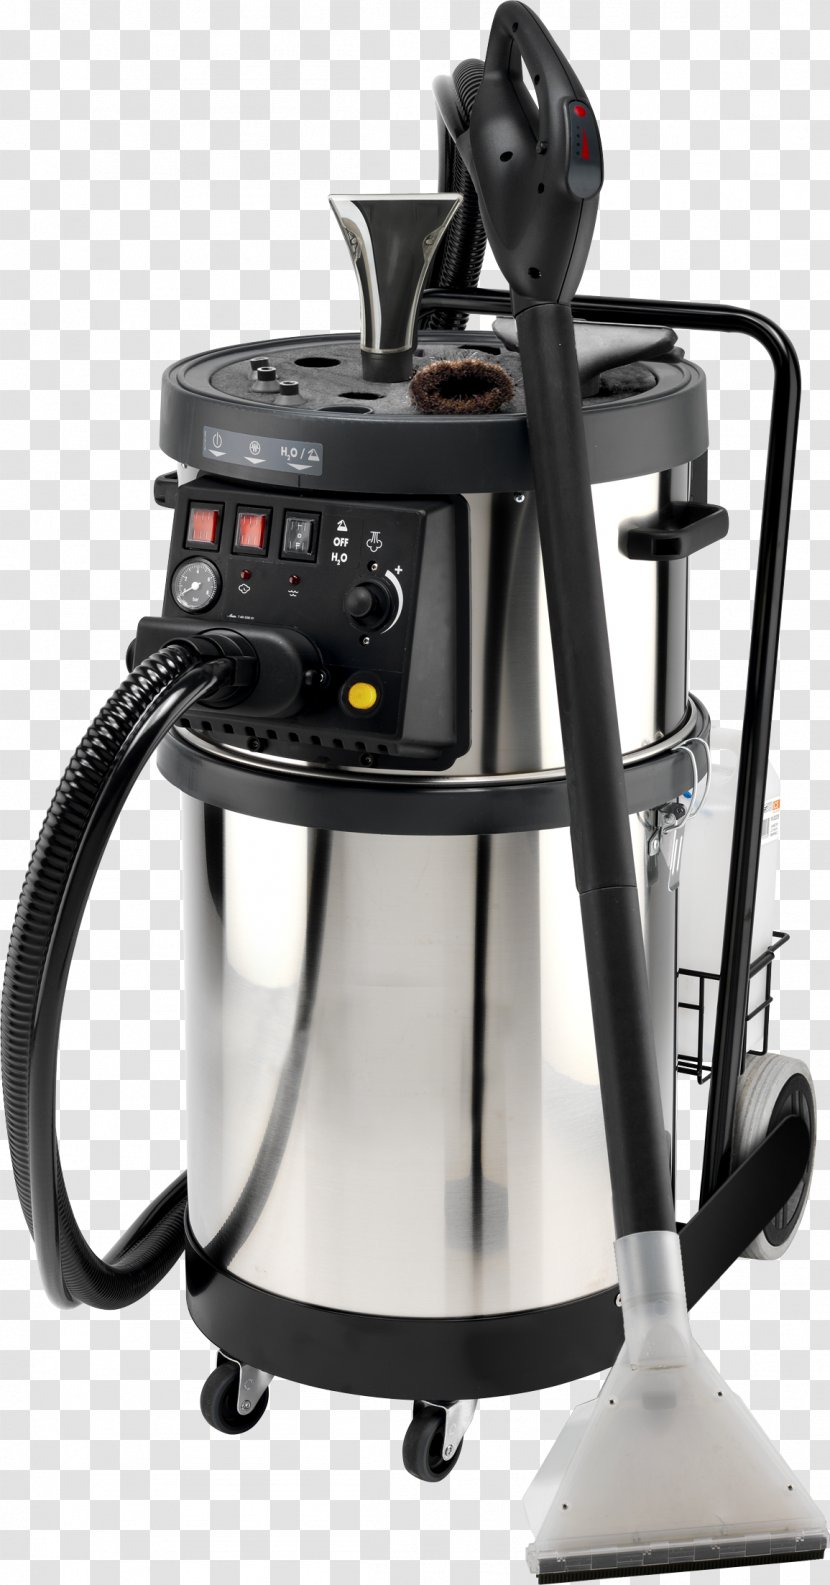 Vapor Steam Cleaner Vacuum Cleaning Generator - Stainless Steel Transparent PNG